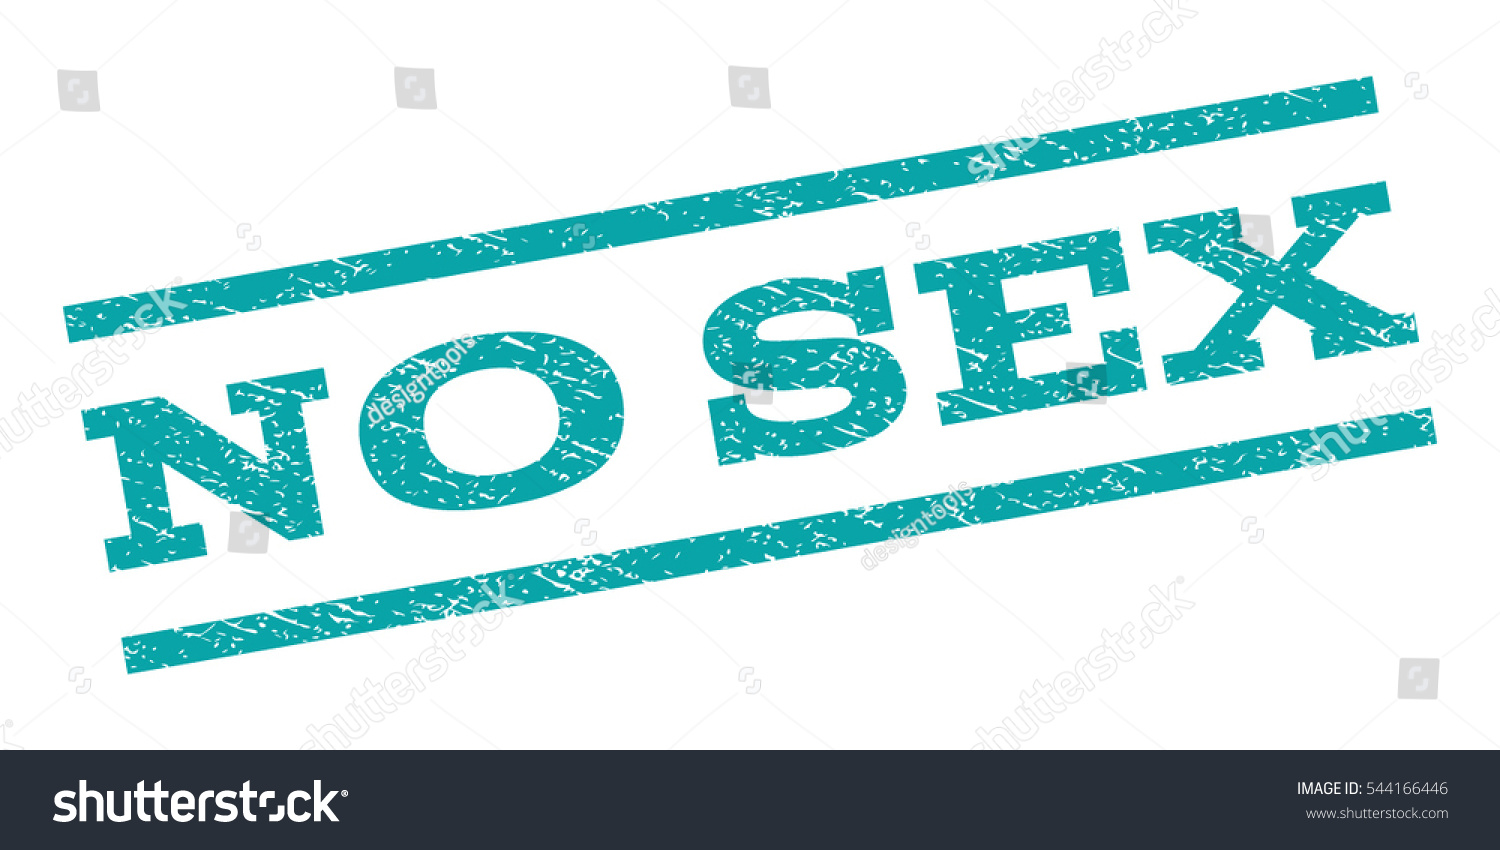 No Sex Watermark Stamp Text Caption Stock Vector Royalty Free 544166446 Shutterstock